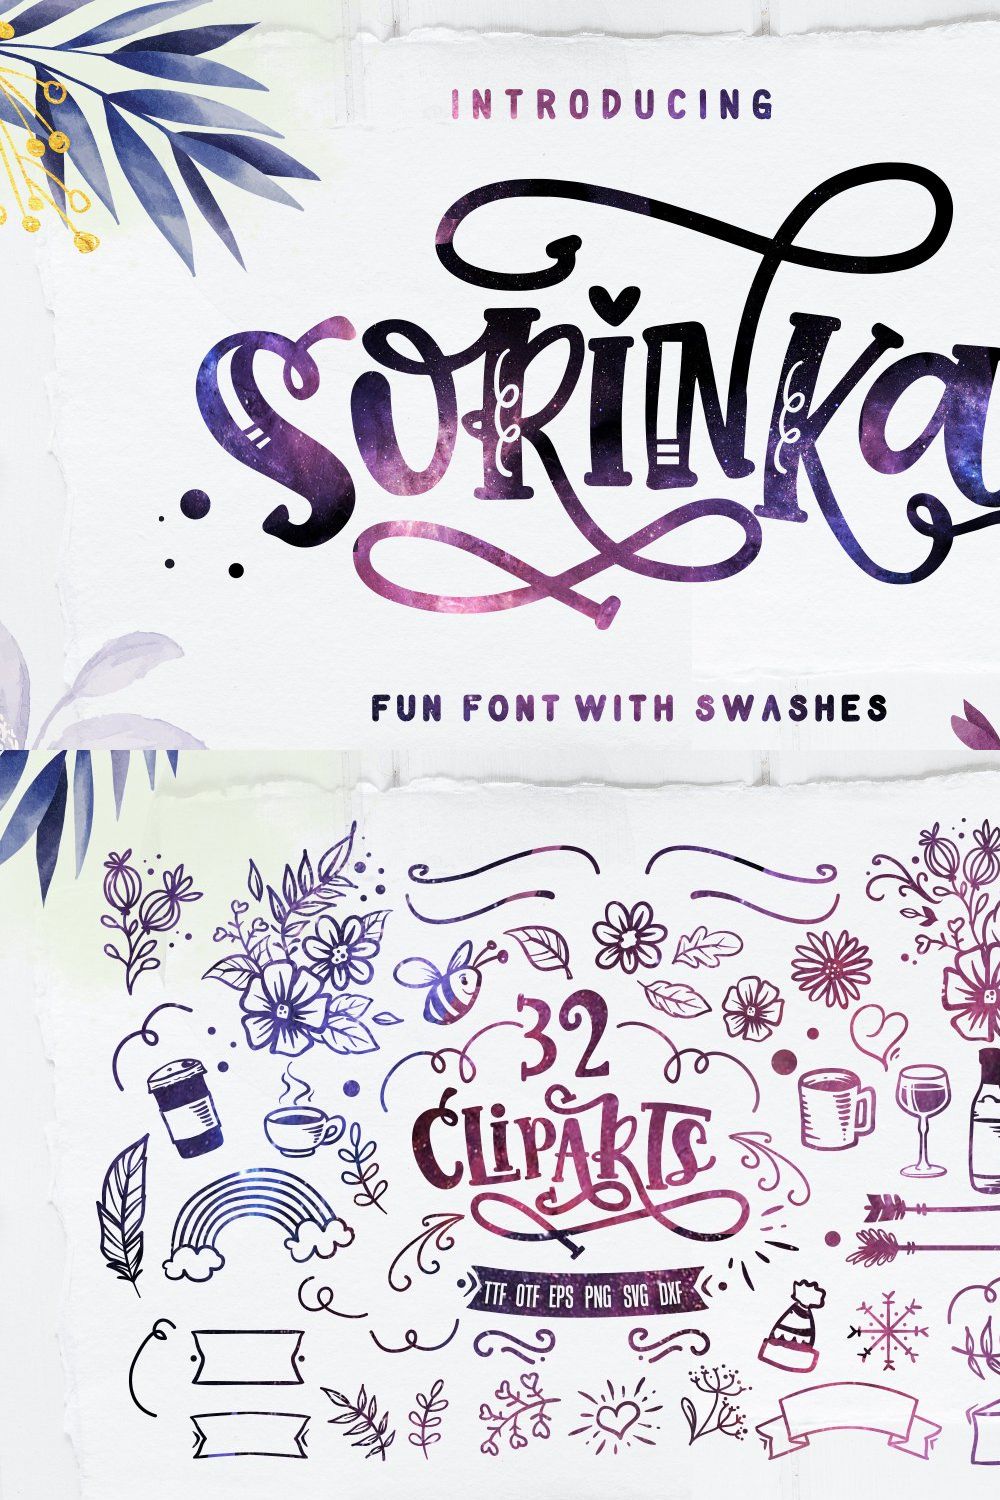 Sorinka Fun Font and extras pinterest preview image.